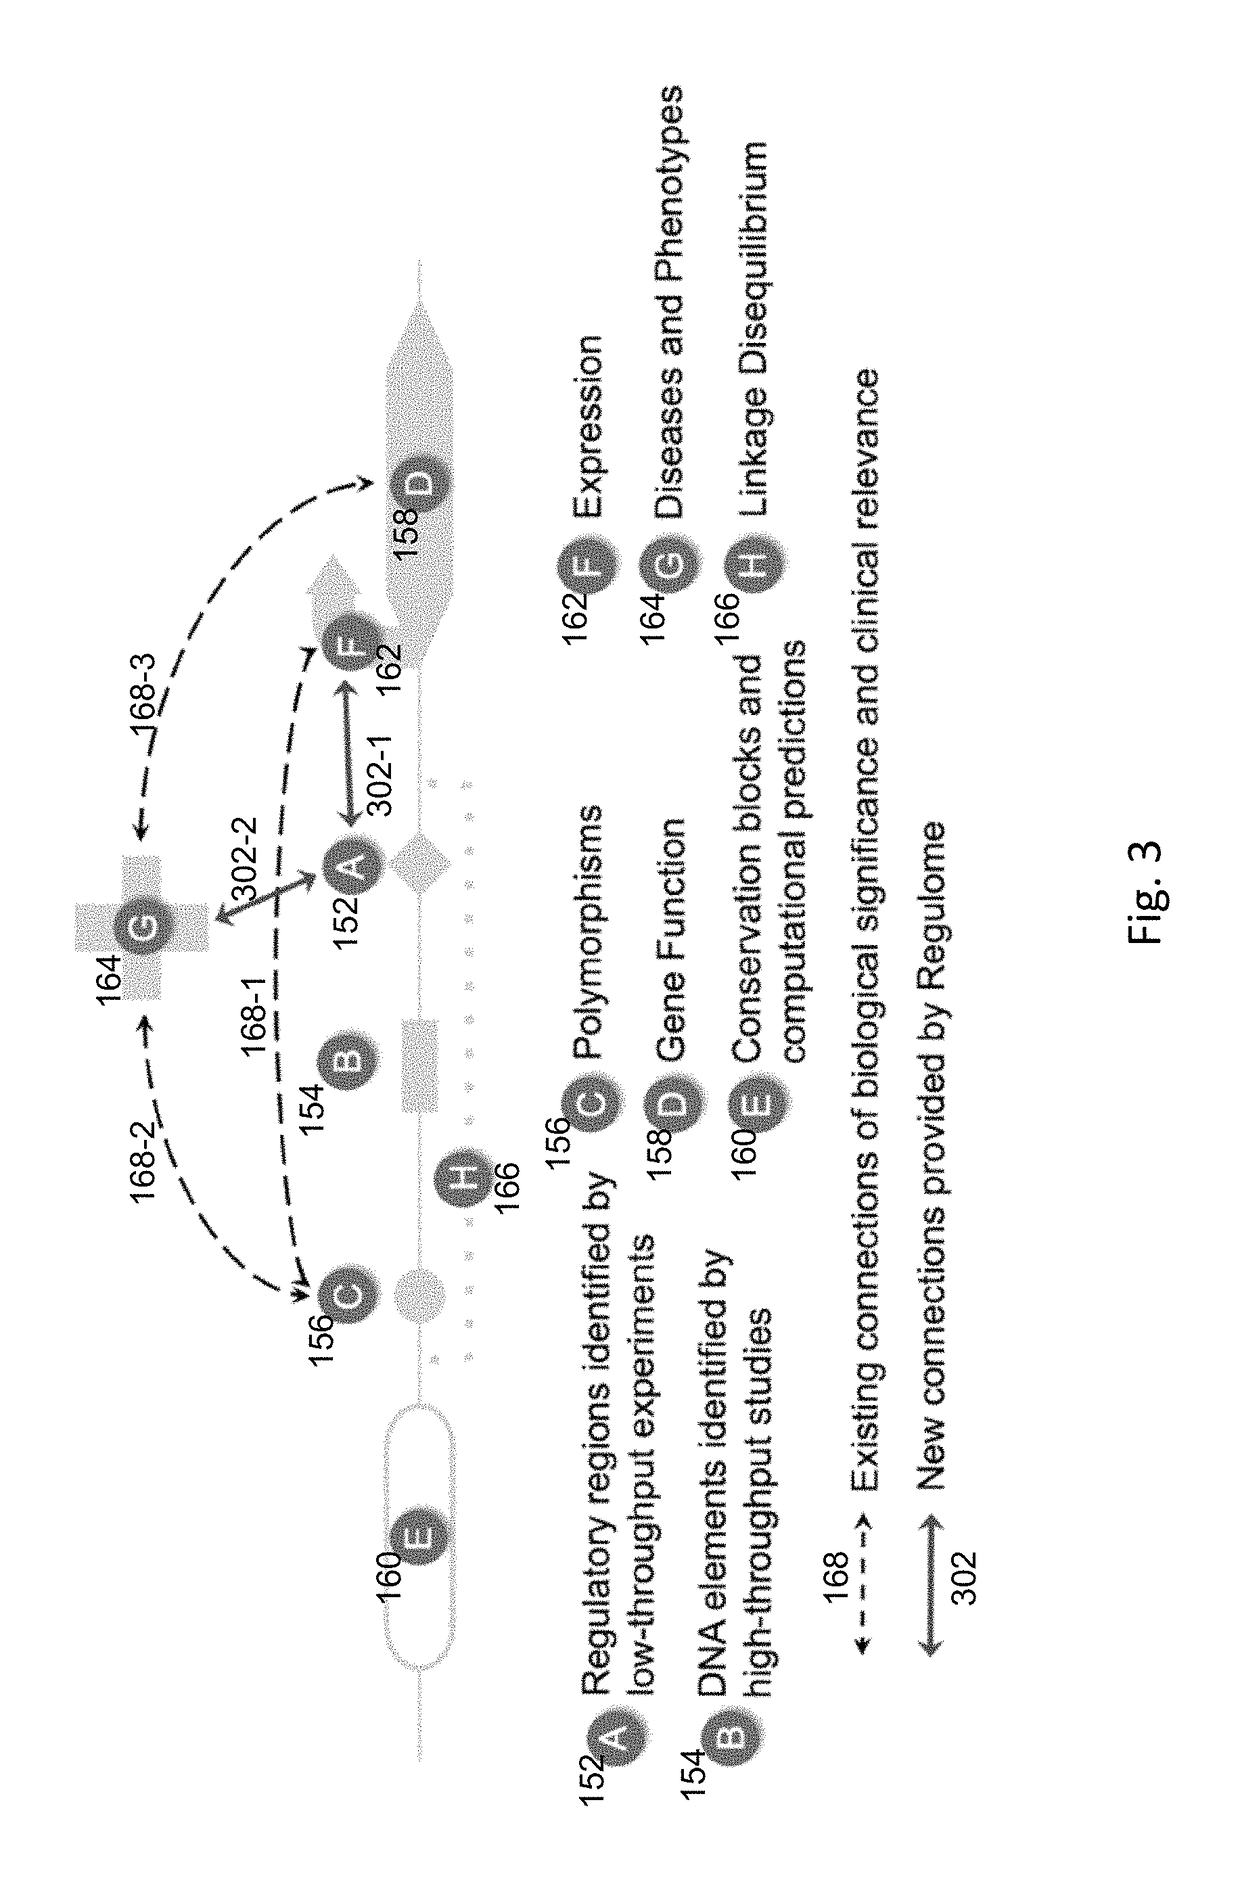 Method and system for the use of biomarkers for regulatory dysfunction in disease